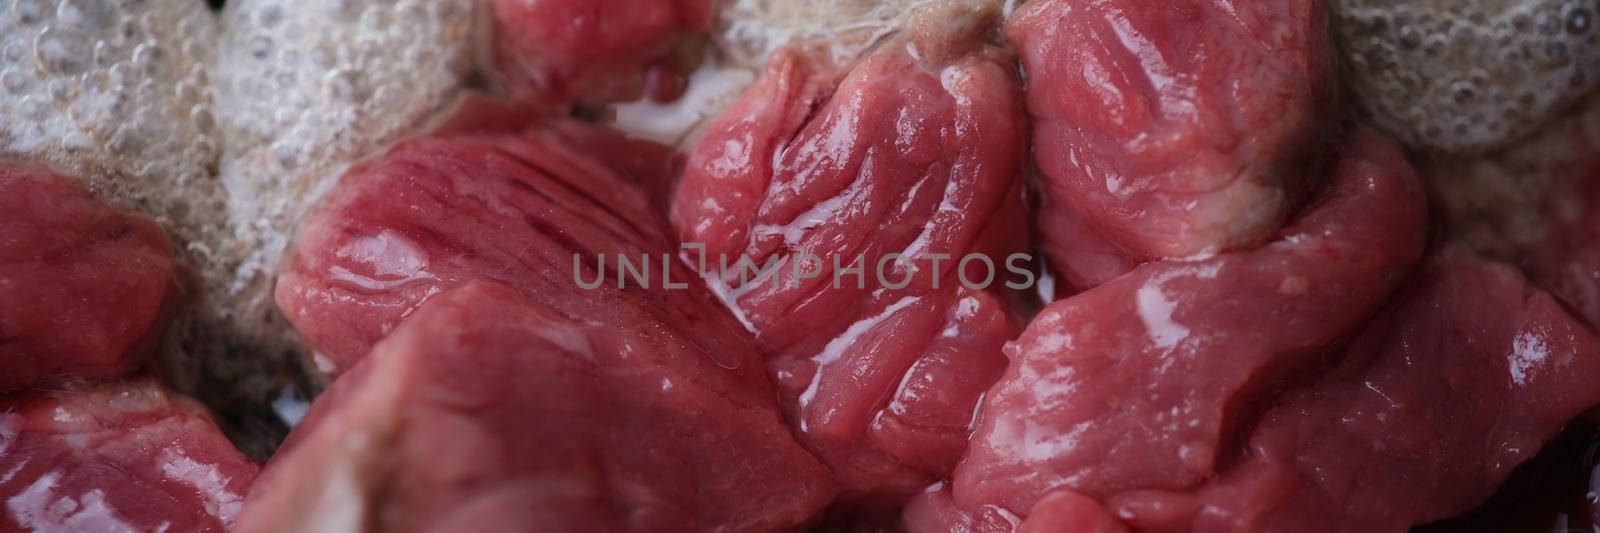 Raw cuts of beef meat being prepared for delicious dinner closeup. Healthy food concept